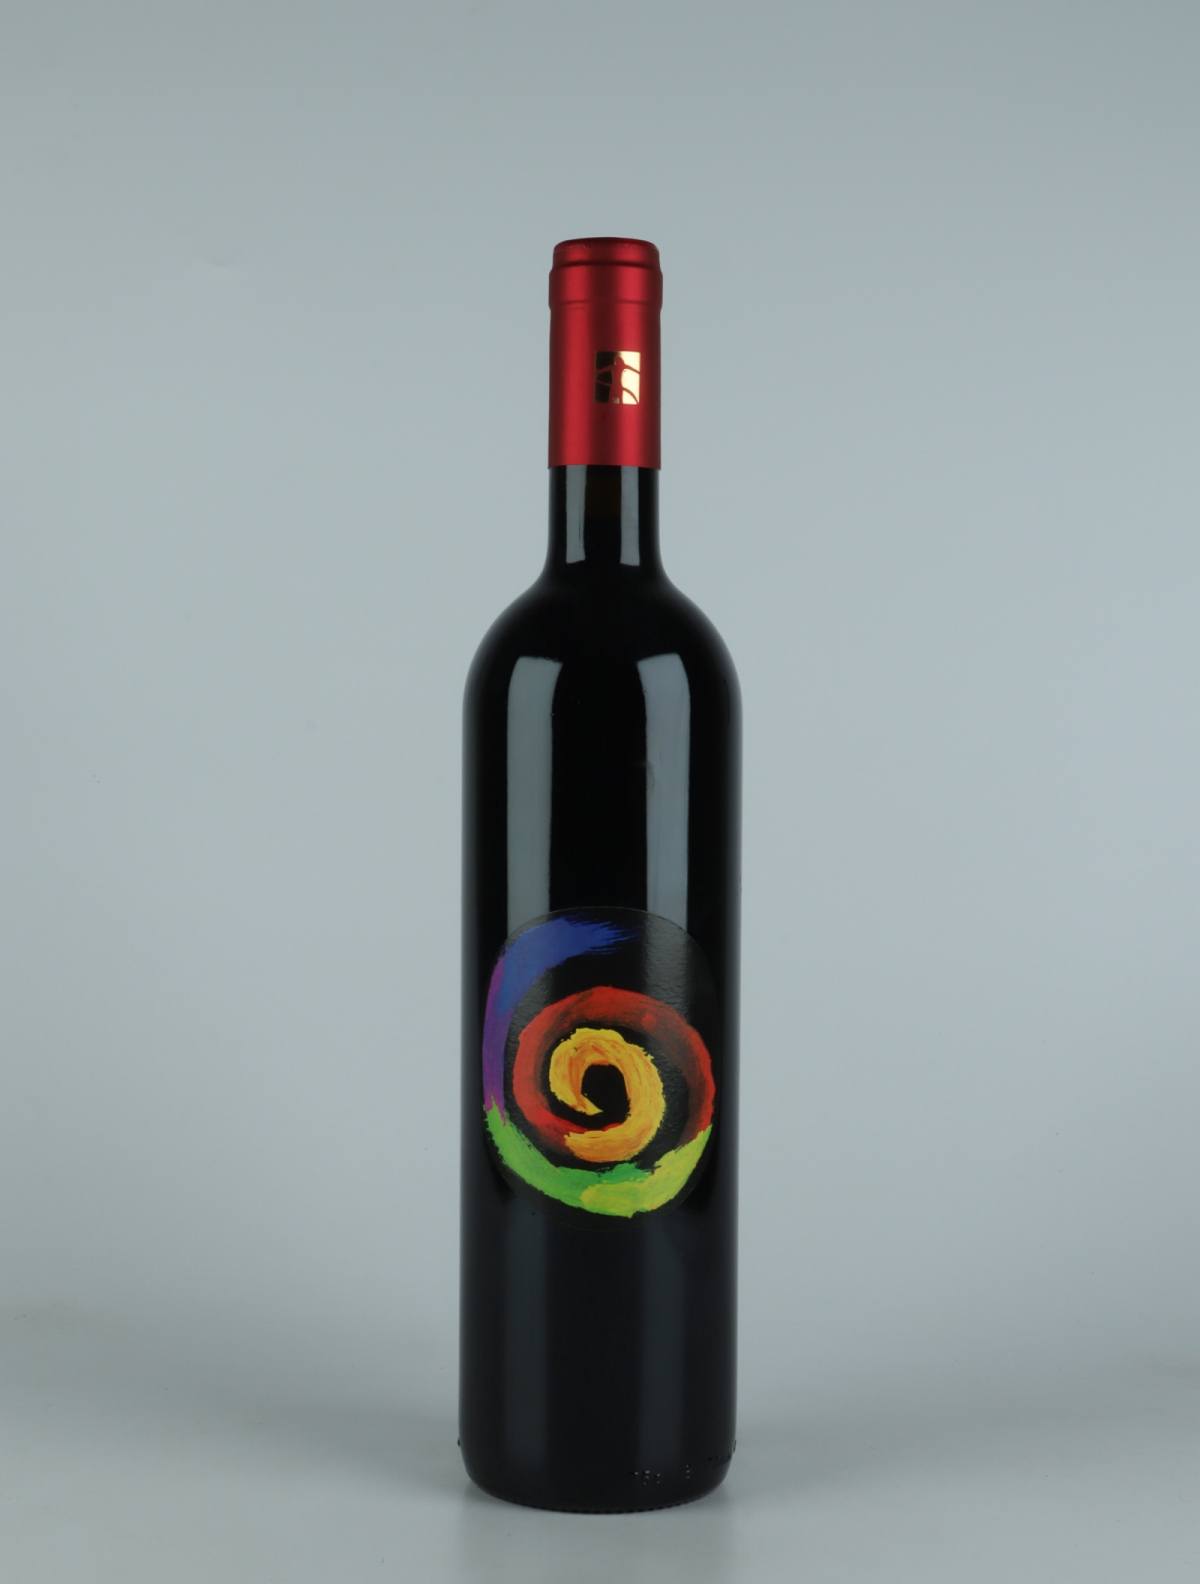 A bottle 2019 Rosso...se Red wine from Tenuta Selvadolce, Liguria in Italy